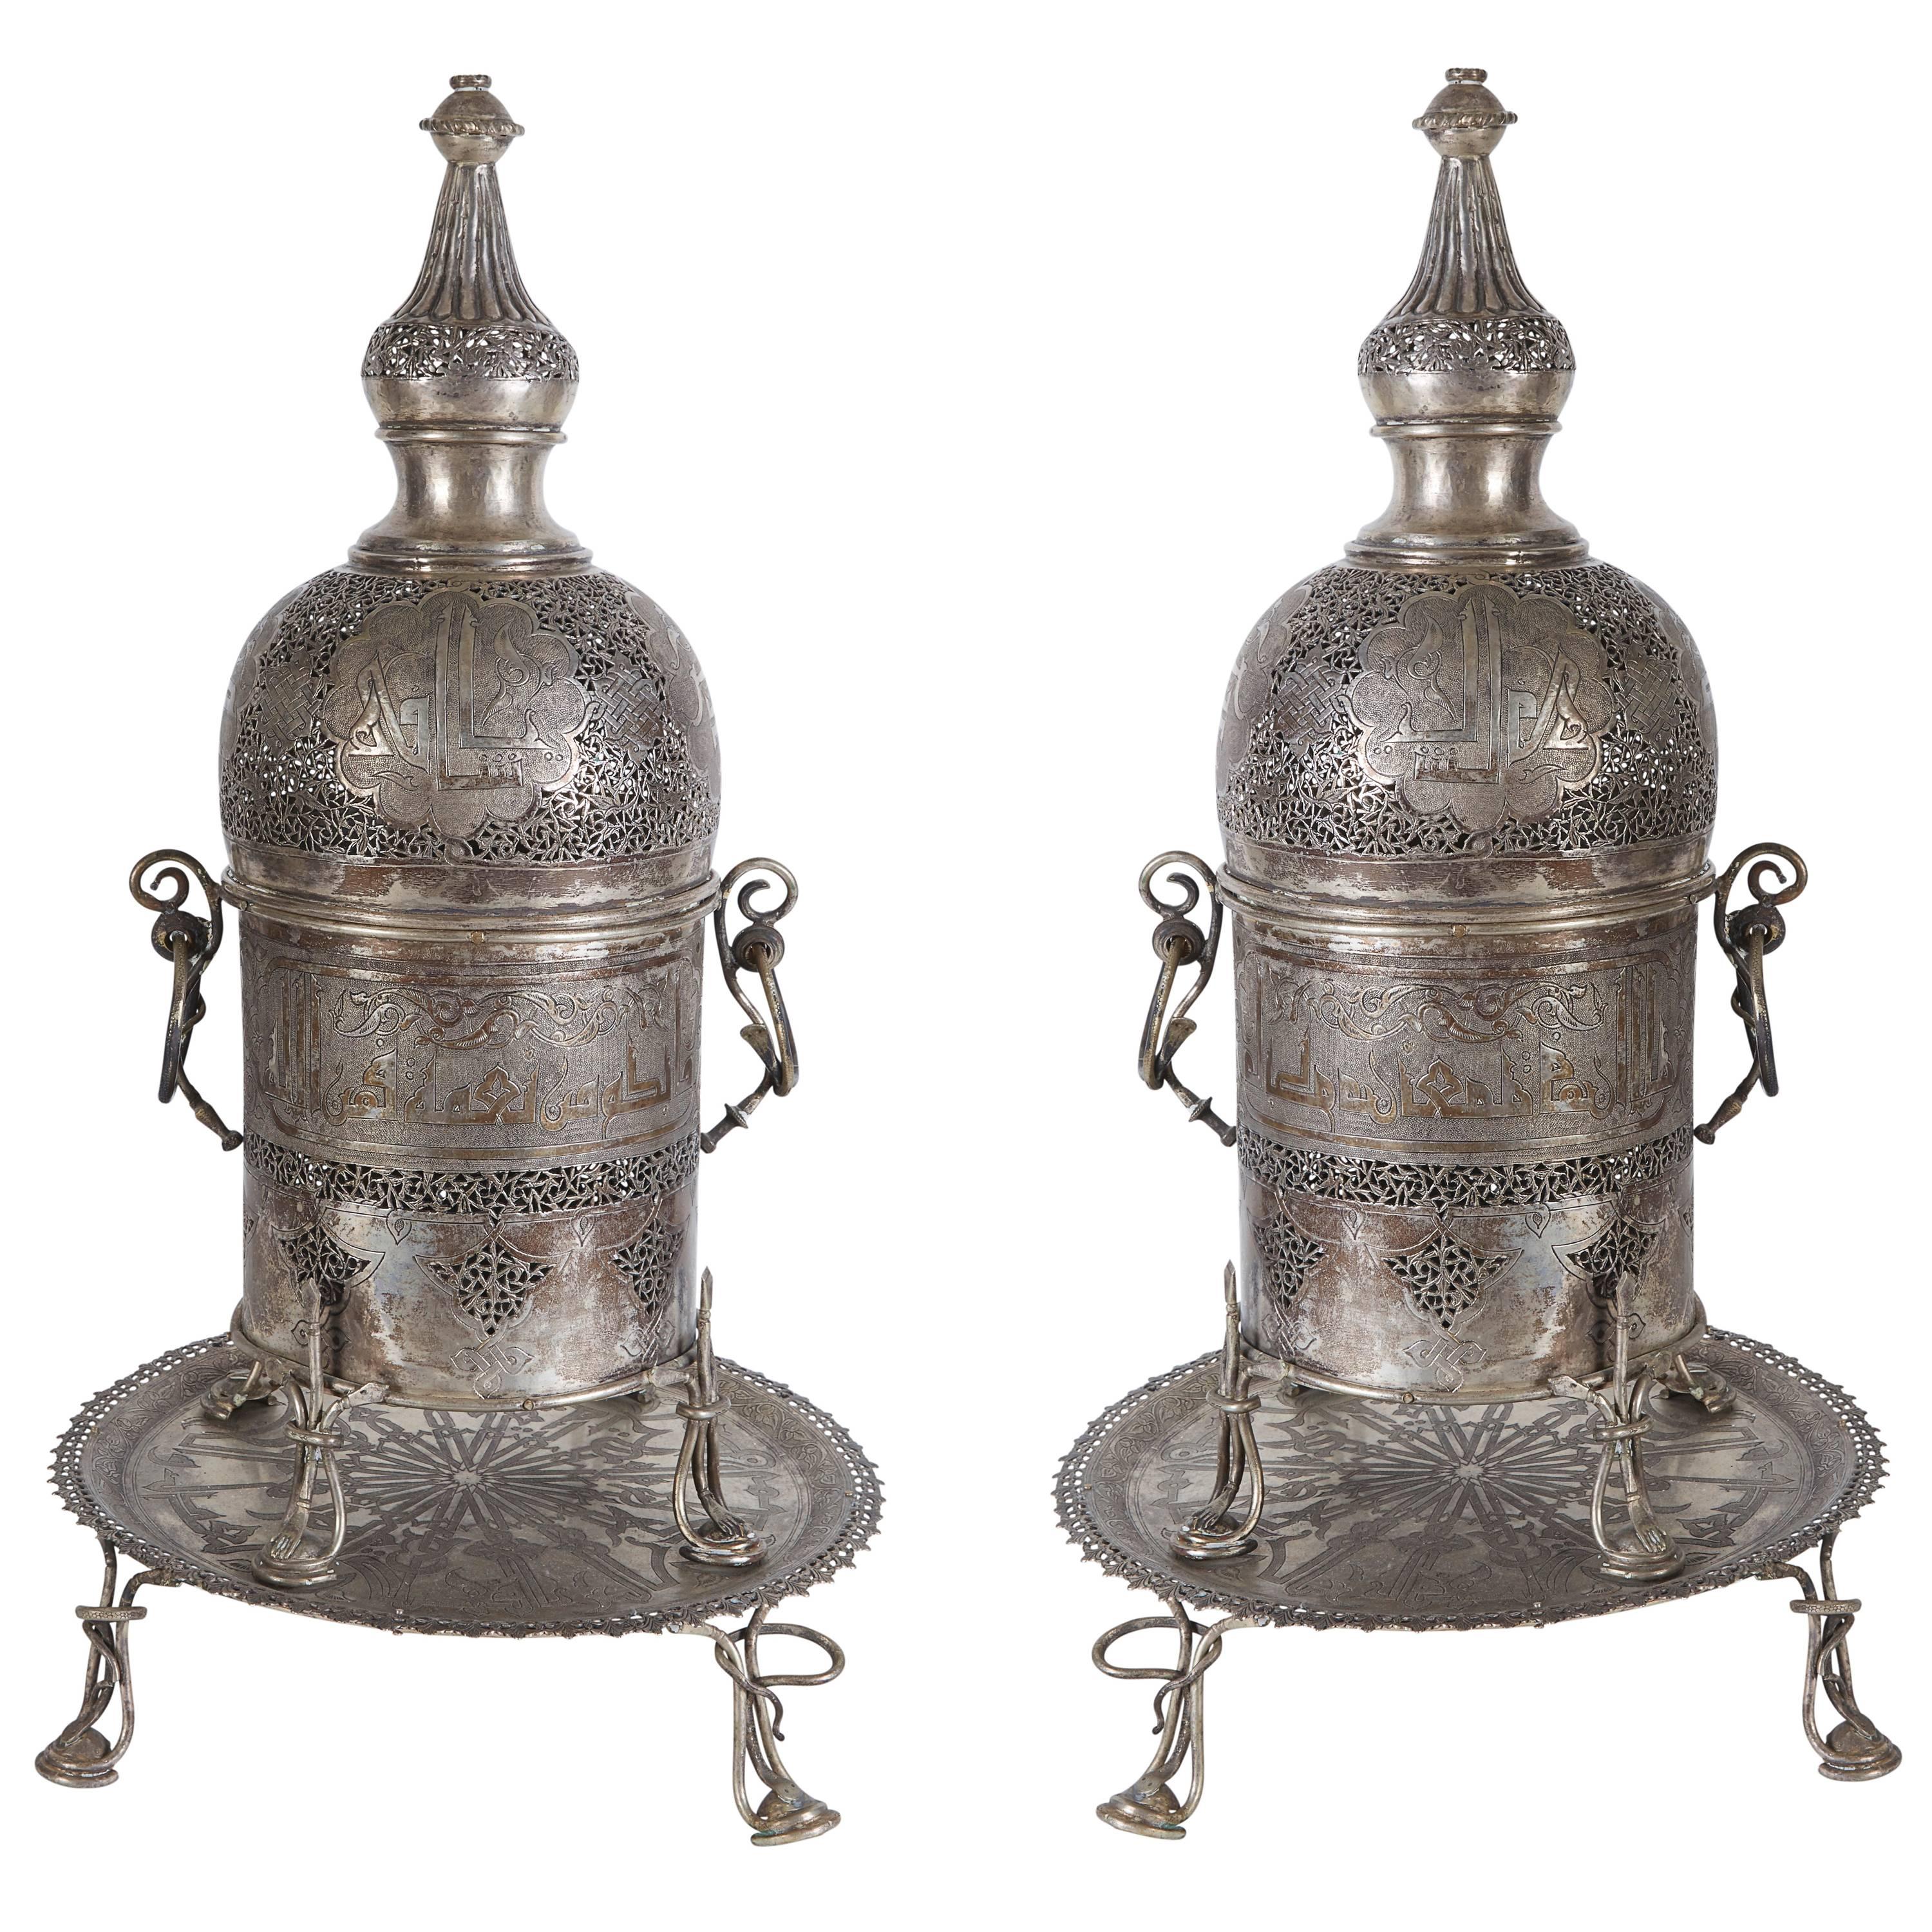 Pair of Antique Islamic Persian Silver Incense Burners with Arabic Calligraphy